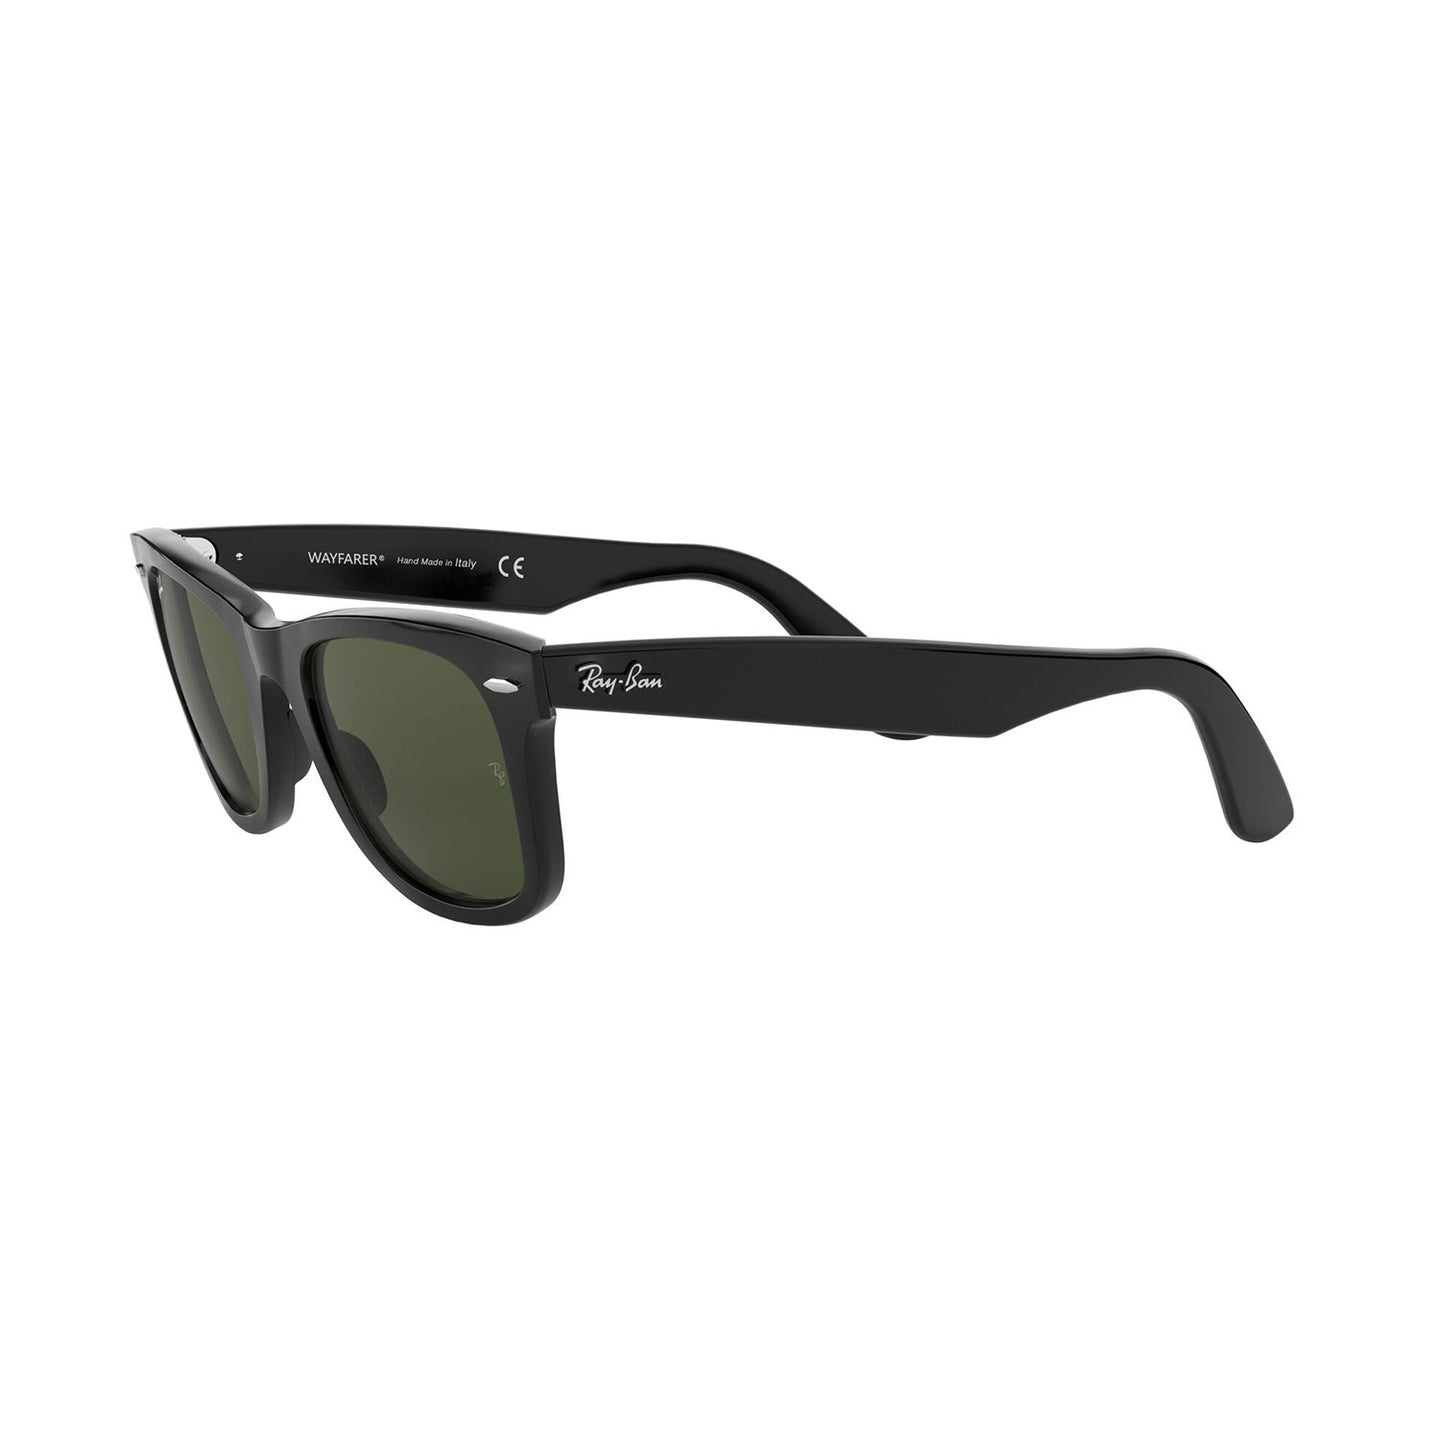 RAY BAN model RB_2140 color 901